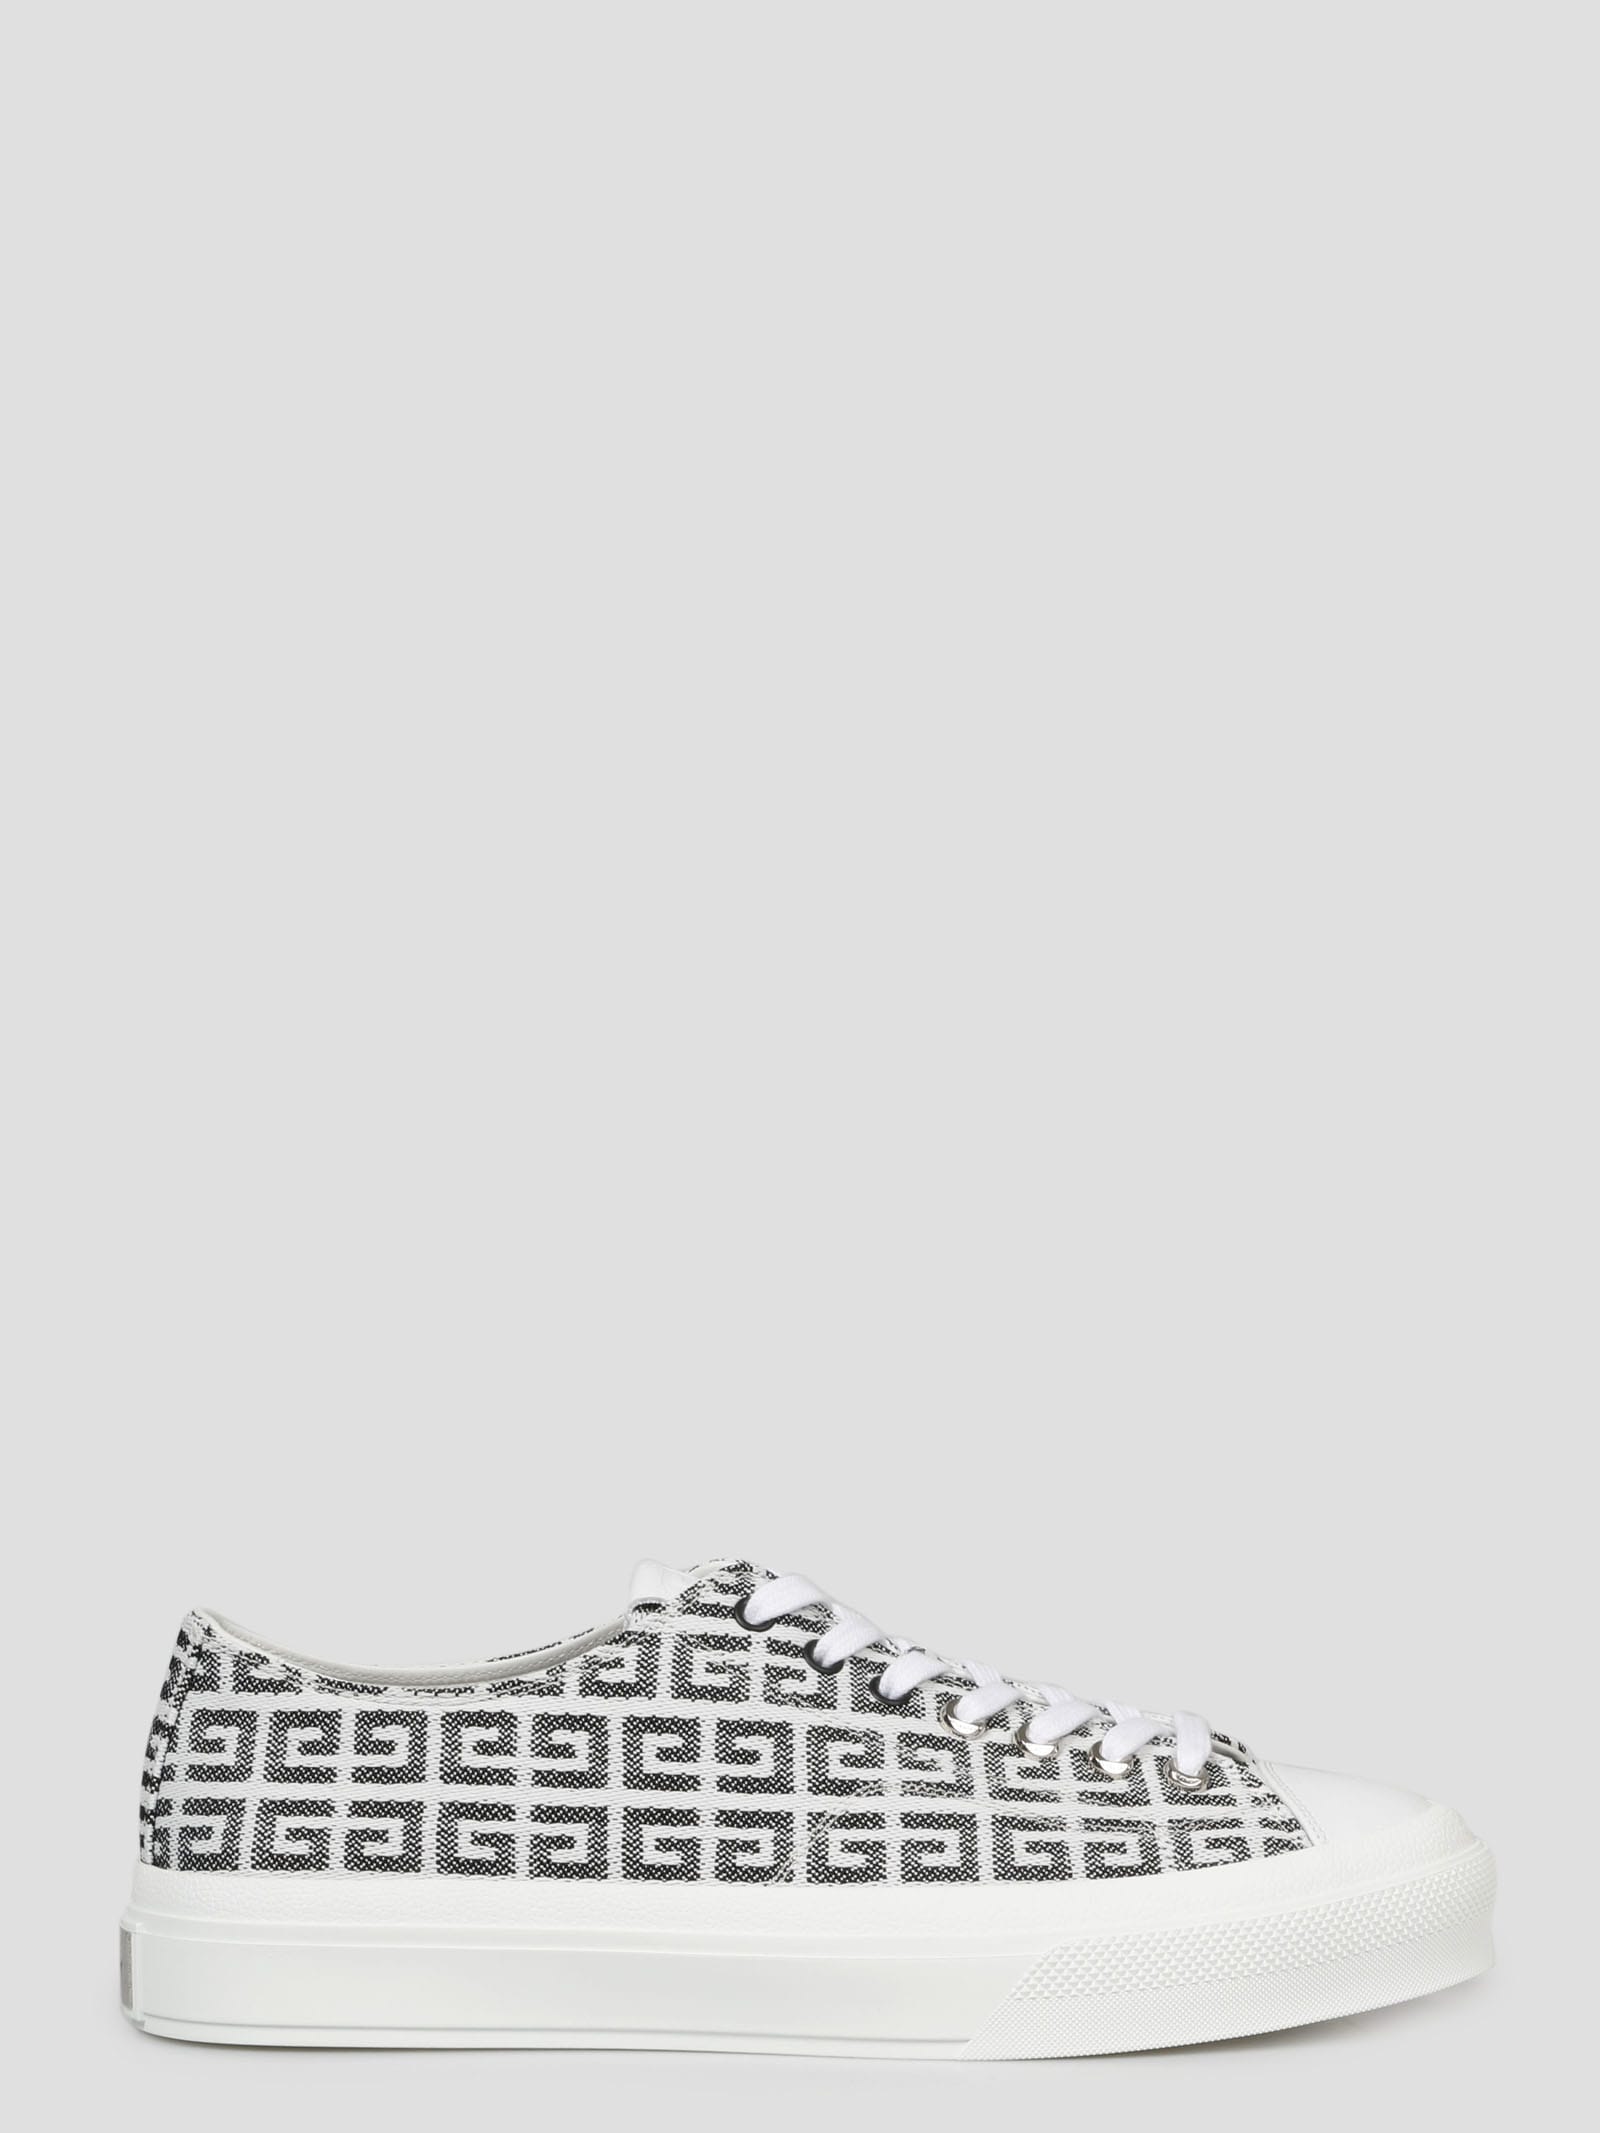 Givenchy City Low Jacquard Sneaker